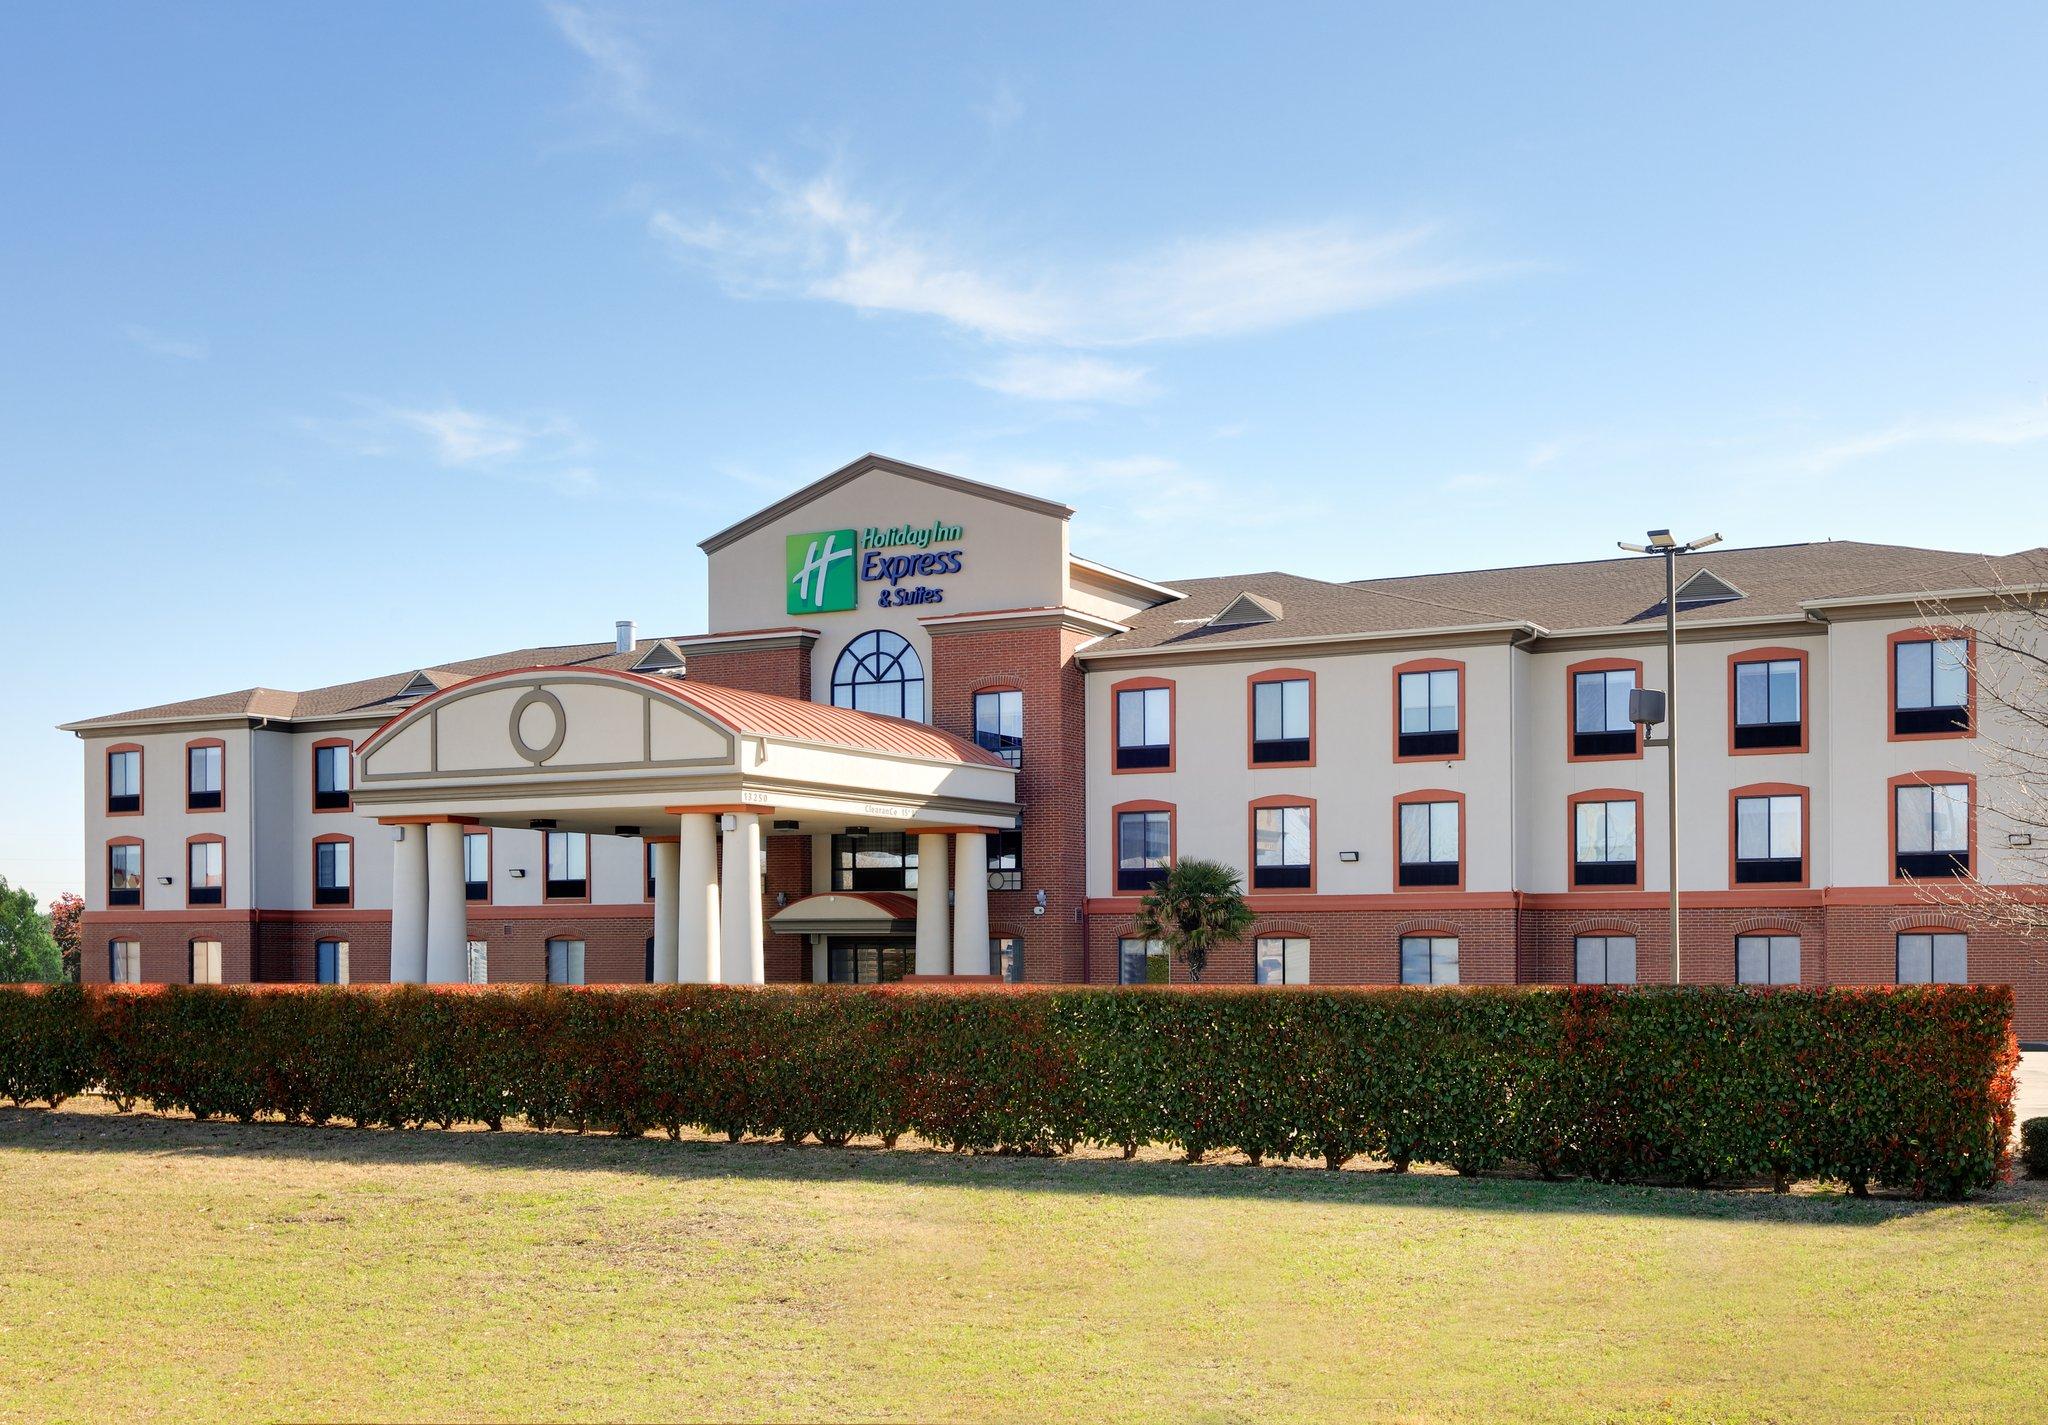 Holiday Inn Express & Suites Burleson/Ft. Worth in Burleson, TX